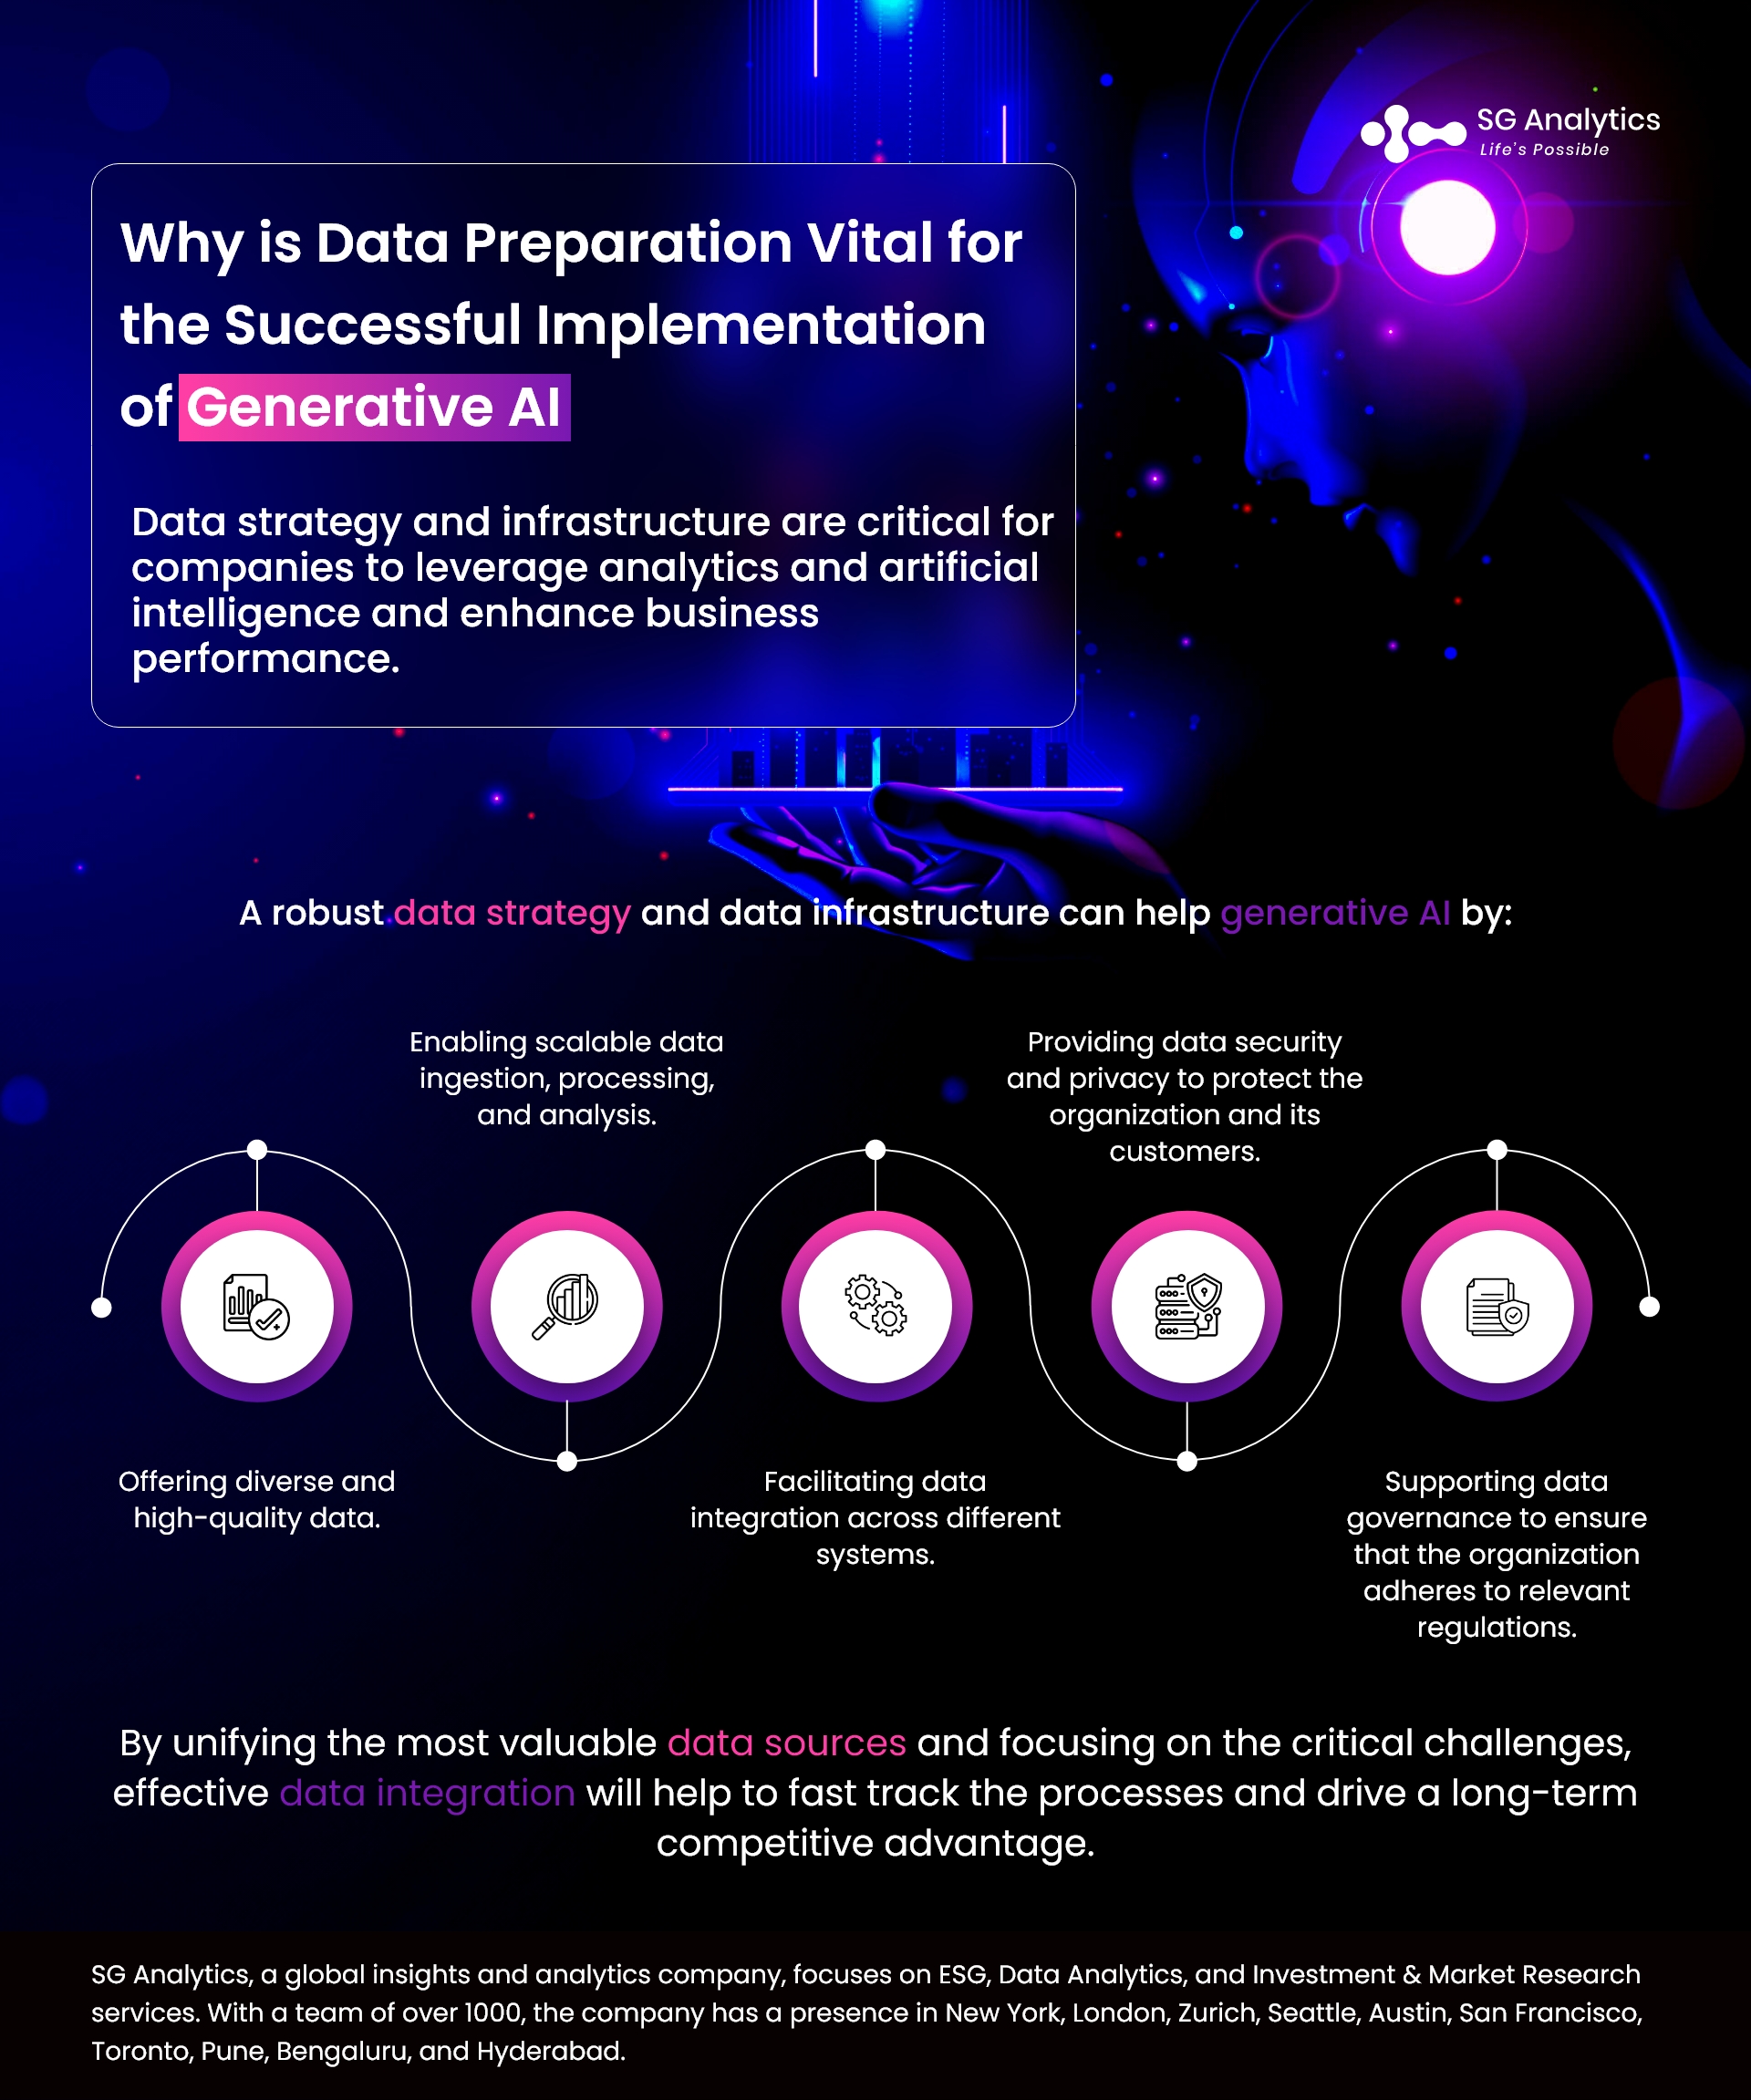 Why is Data Preparation Vital for the Successful Implementation of Generative AI